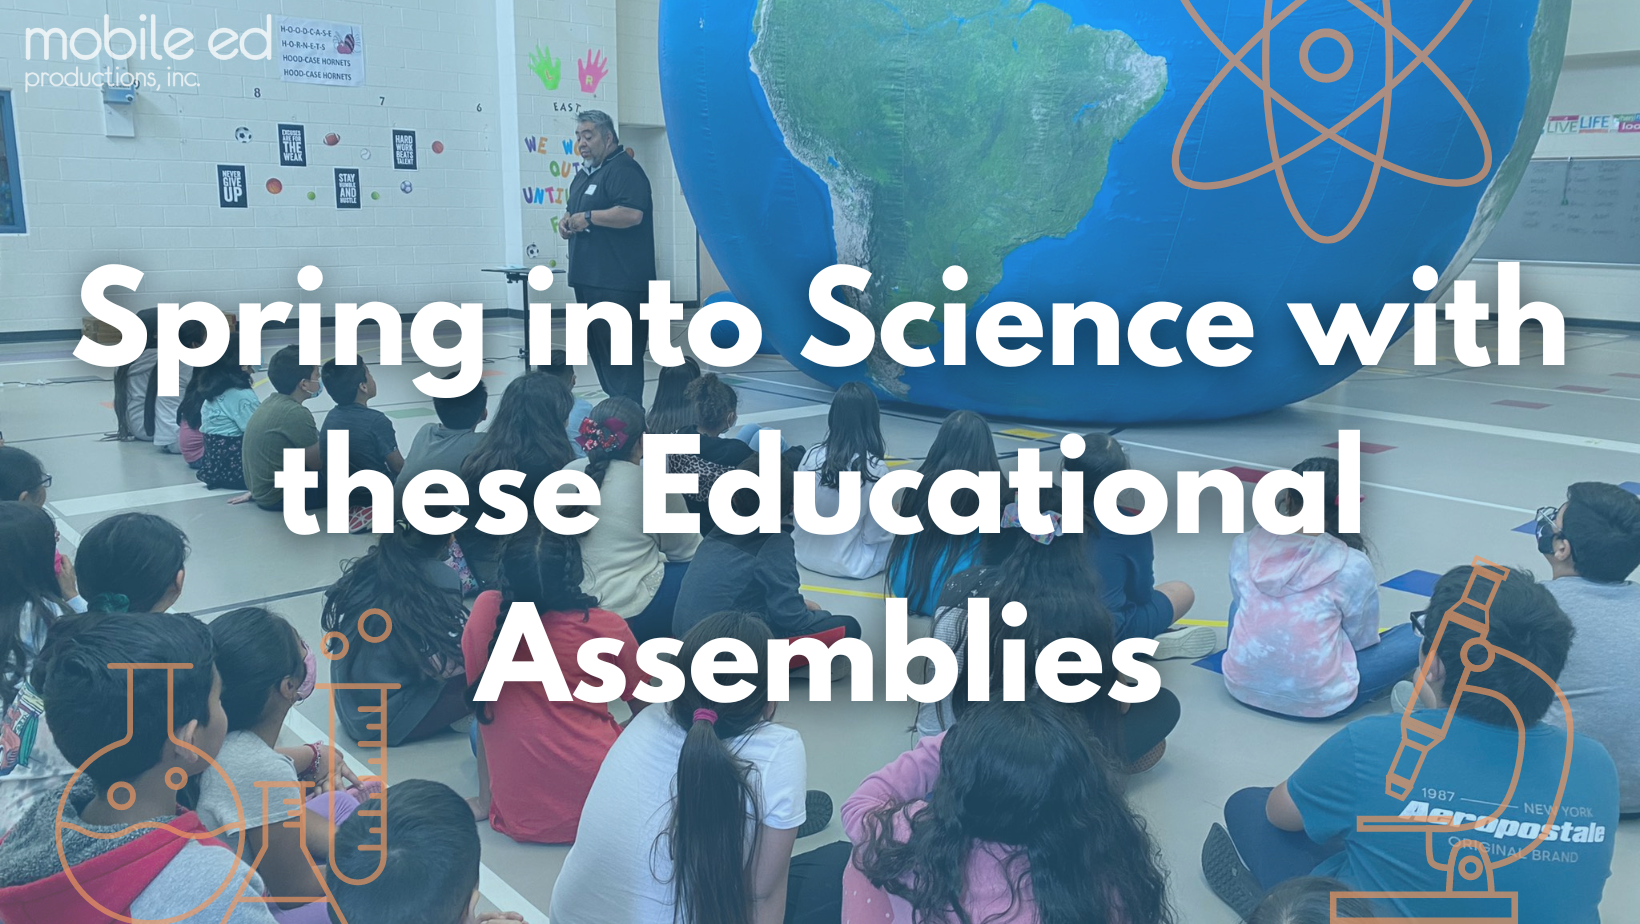 Spring into Science with these Educational Assemblies